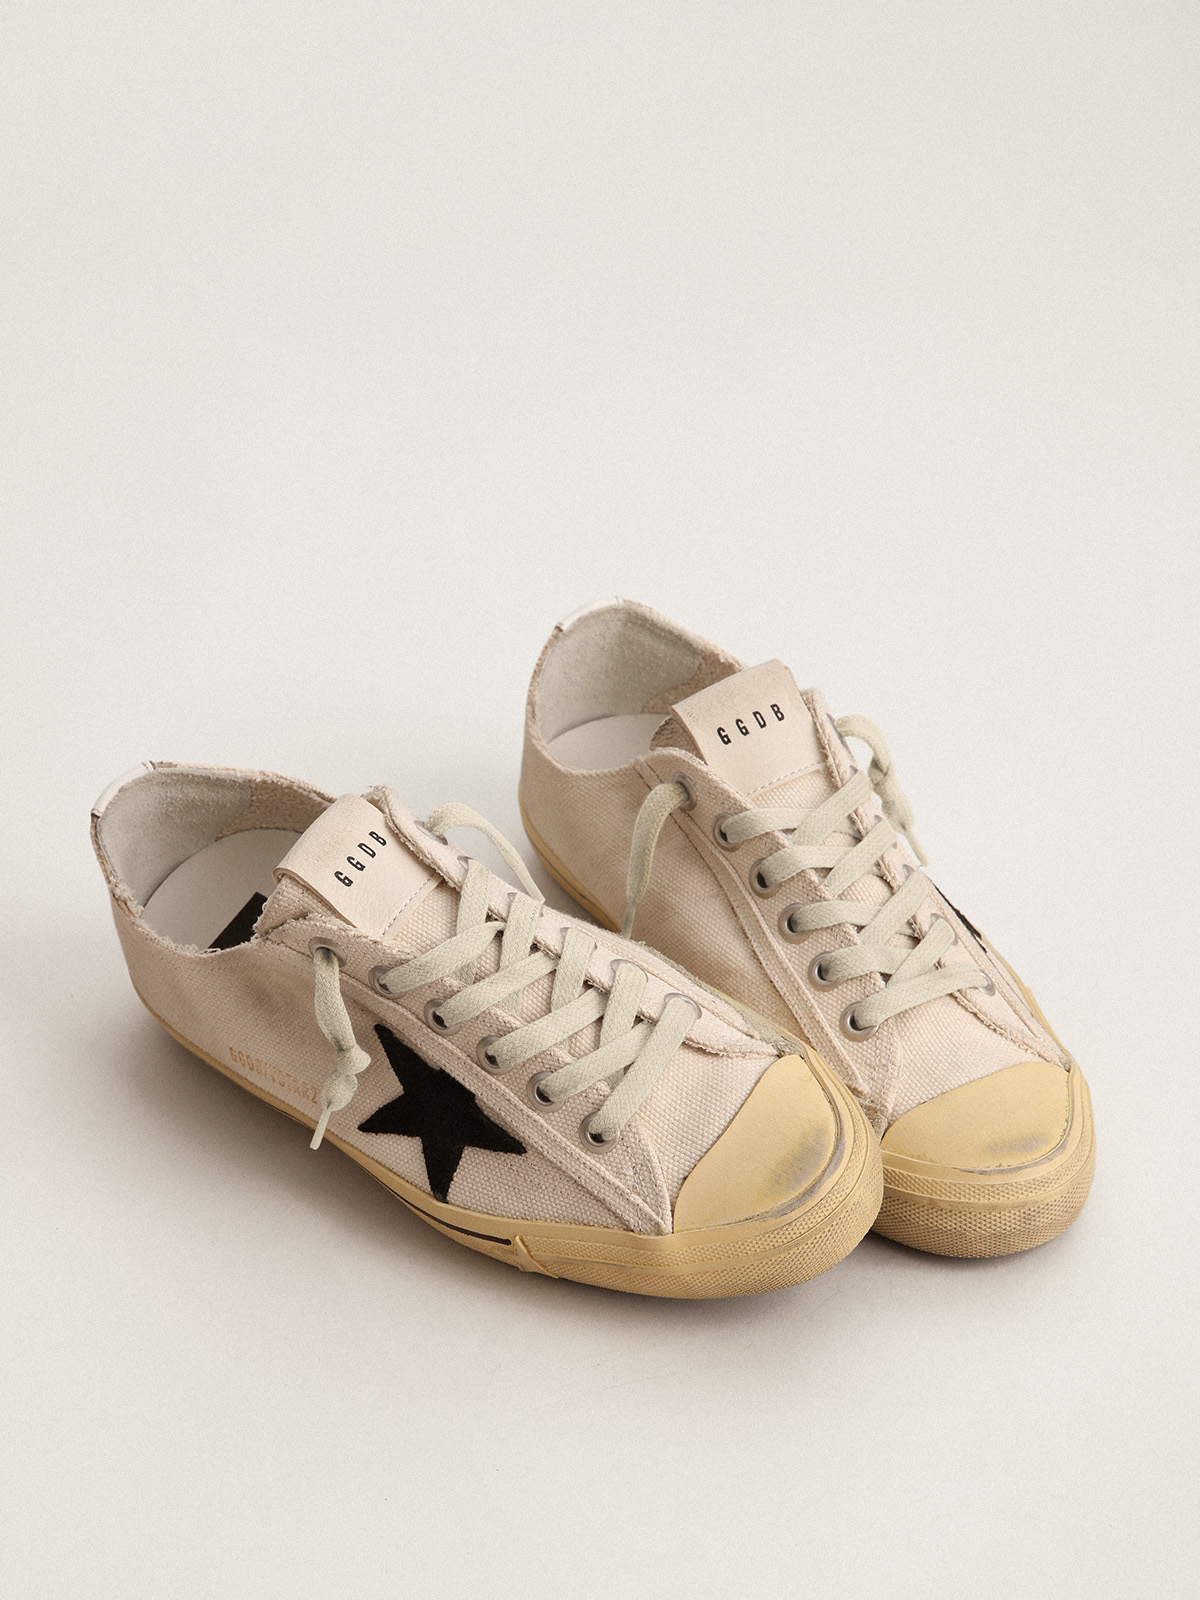 Women's V-Star LTD with black suede star and embroidered lettering